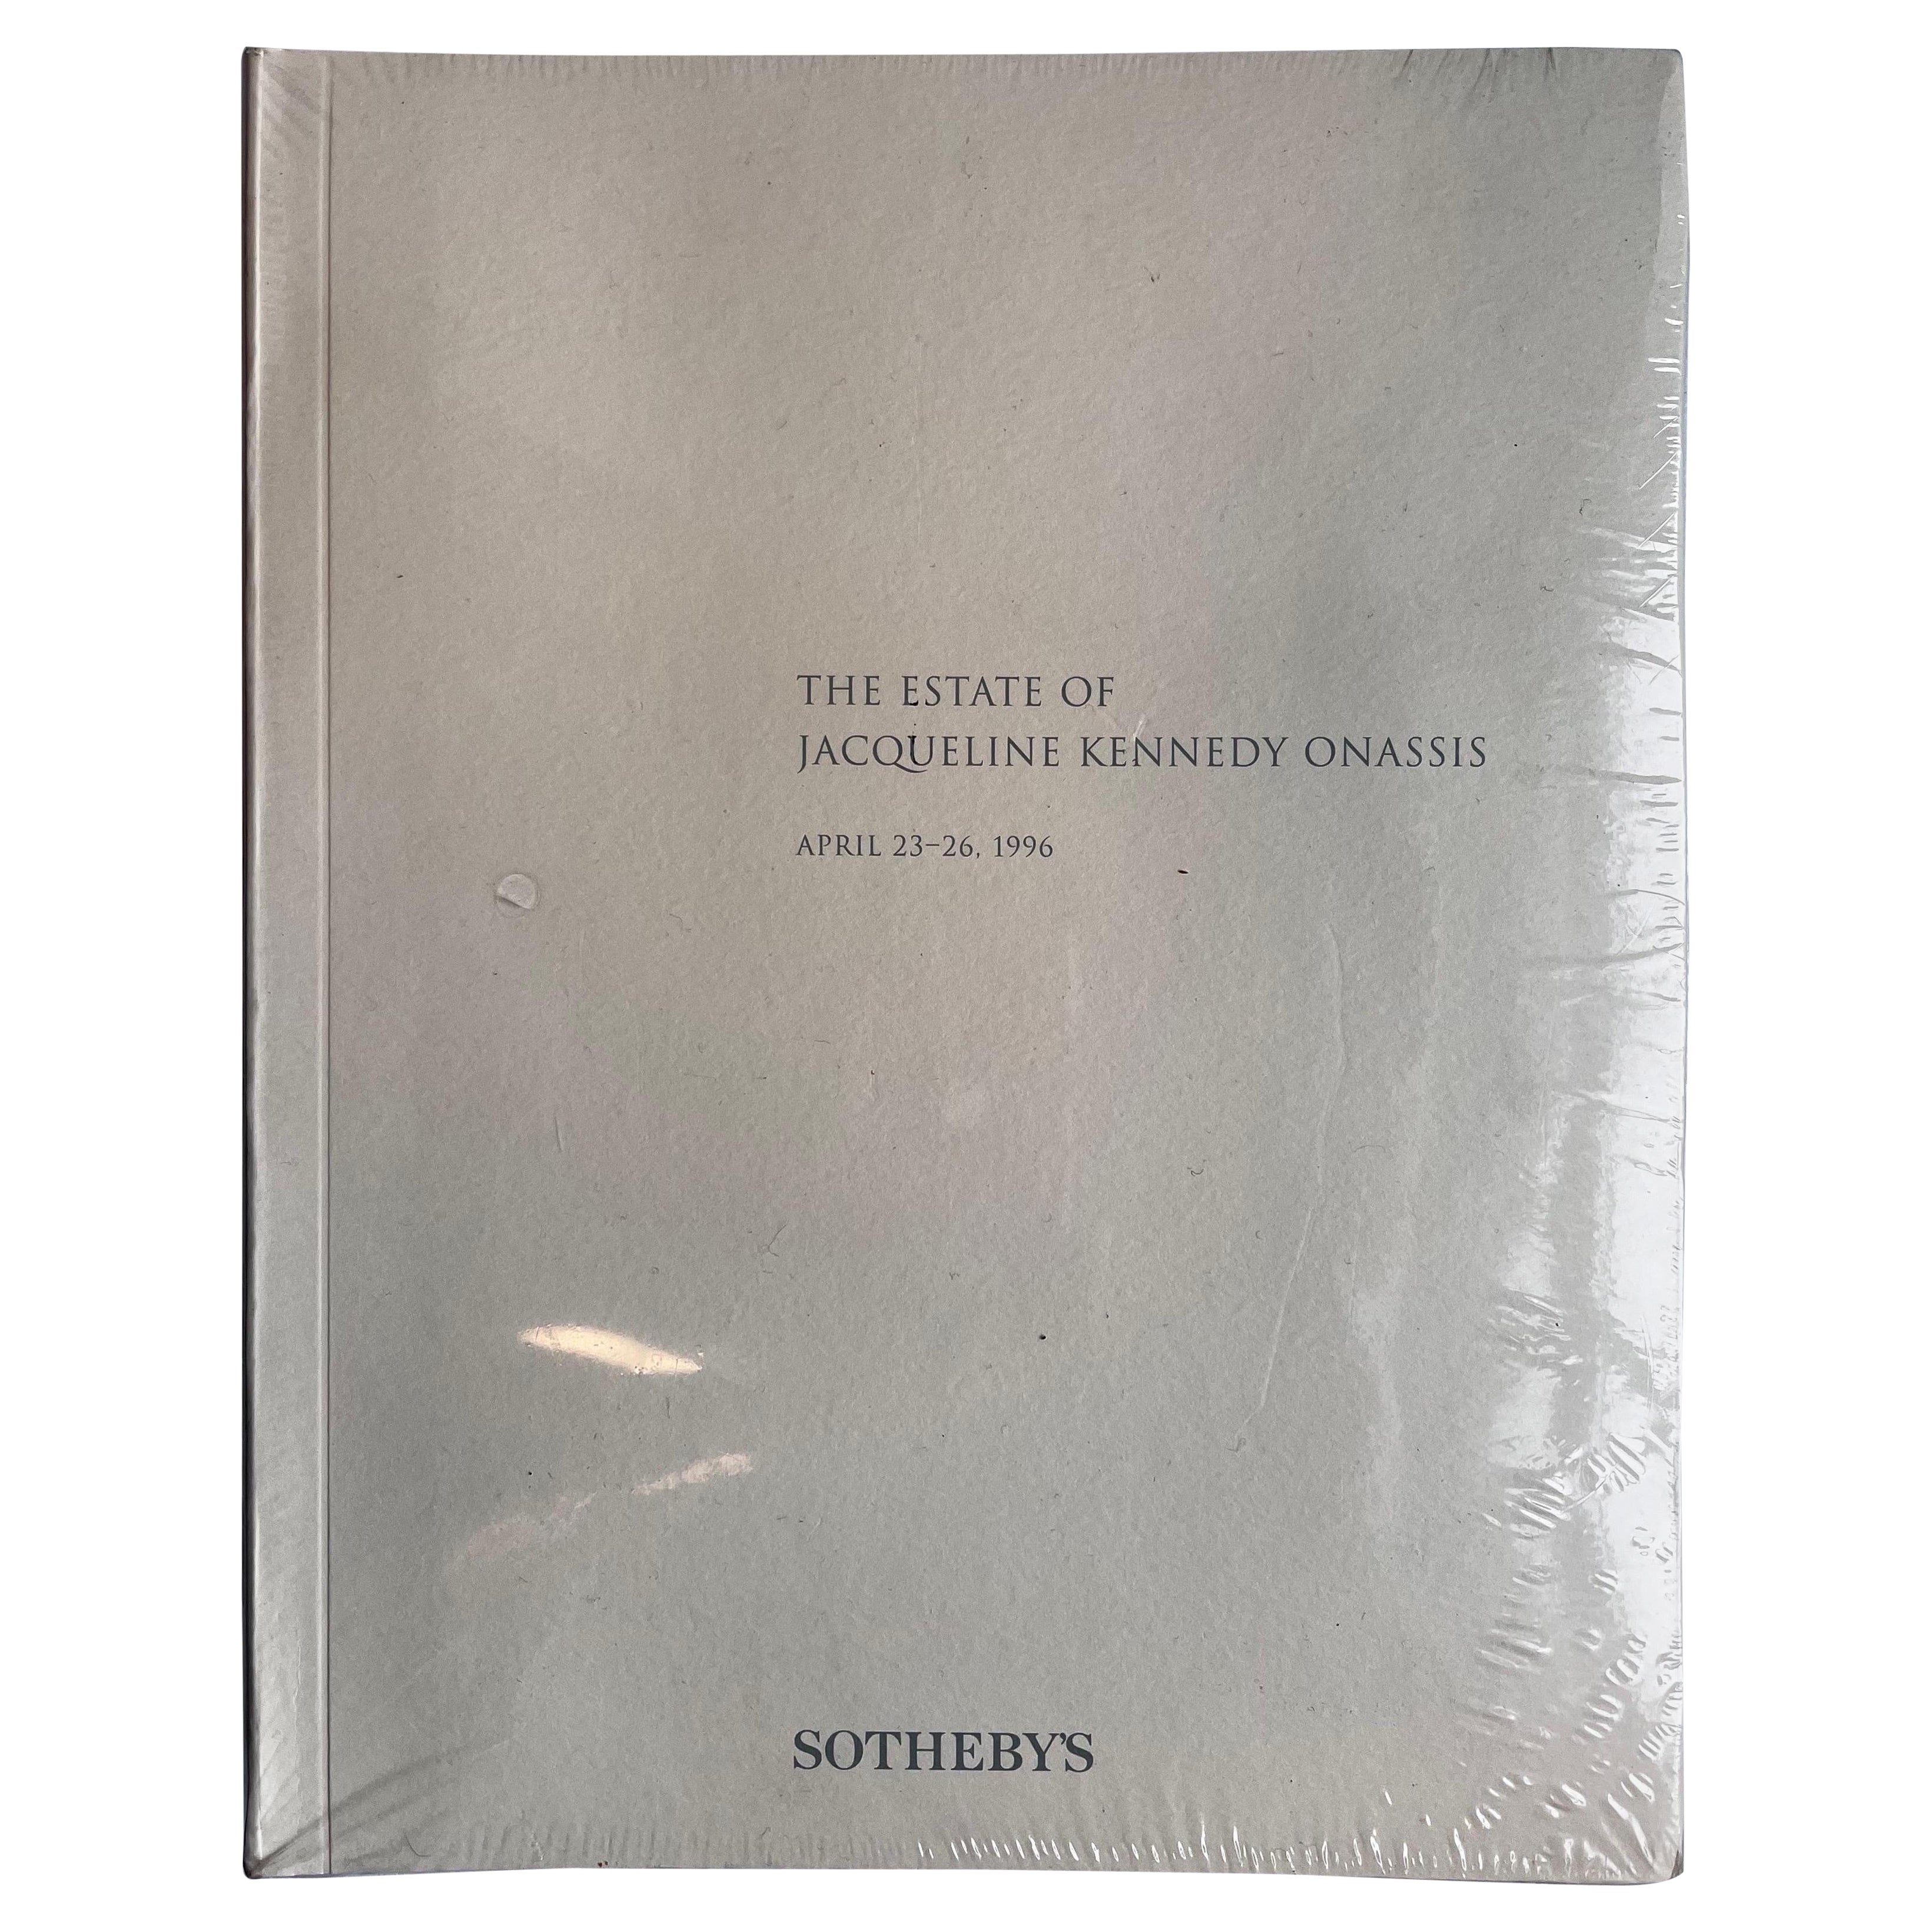 Jacqueline Kennedy Onassis, Sotheby's Auktionskatalog, &New in Wrapper